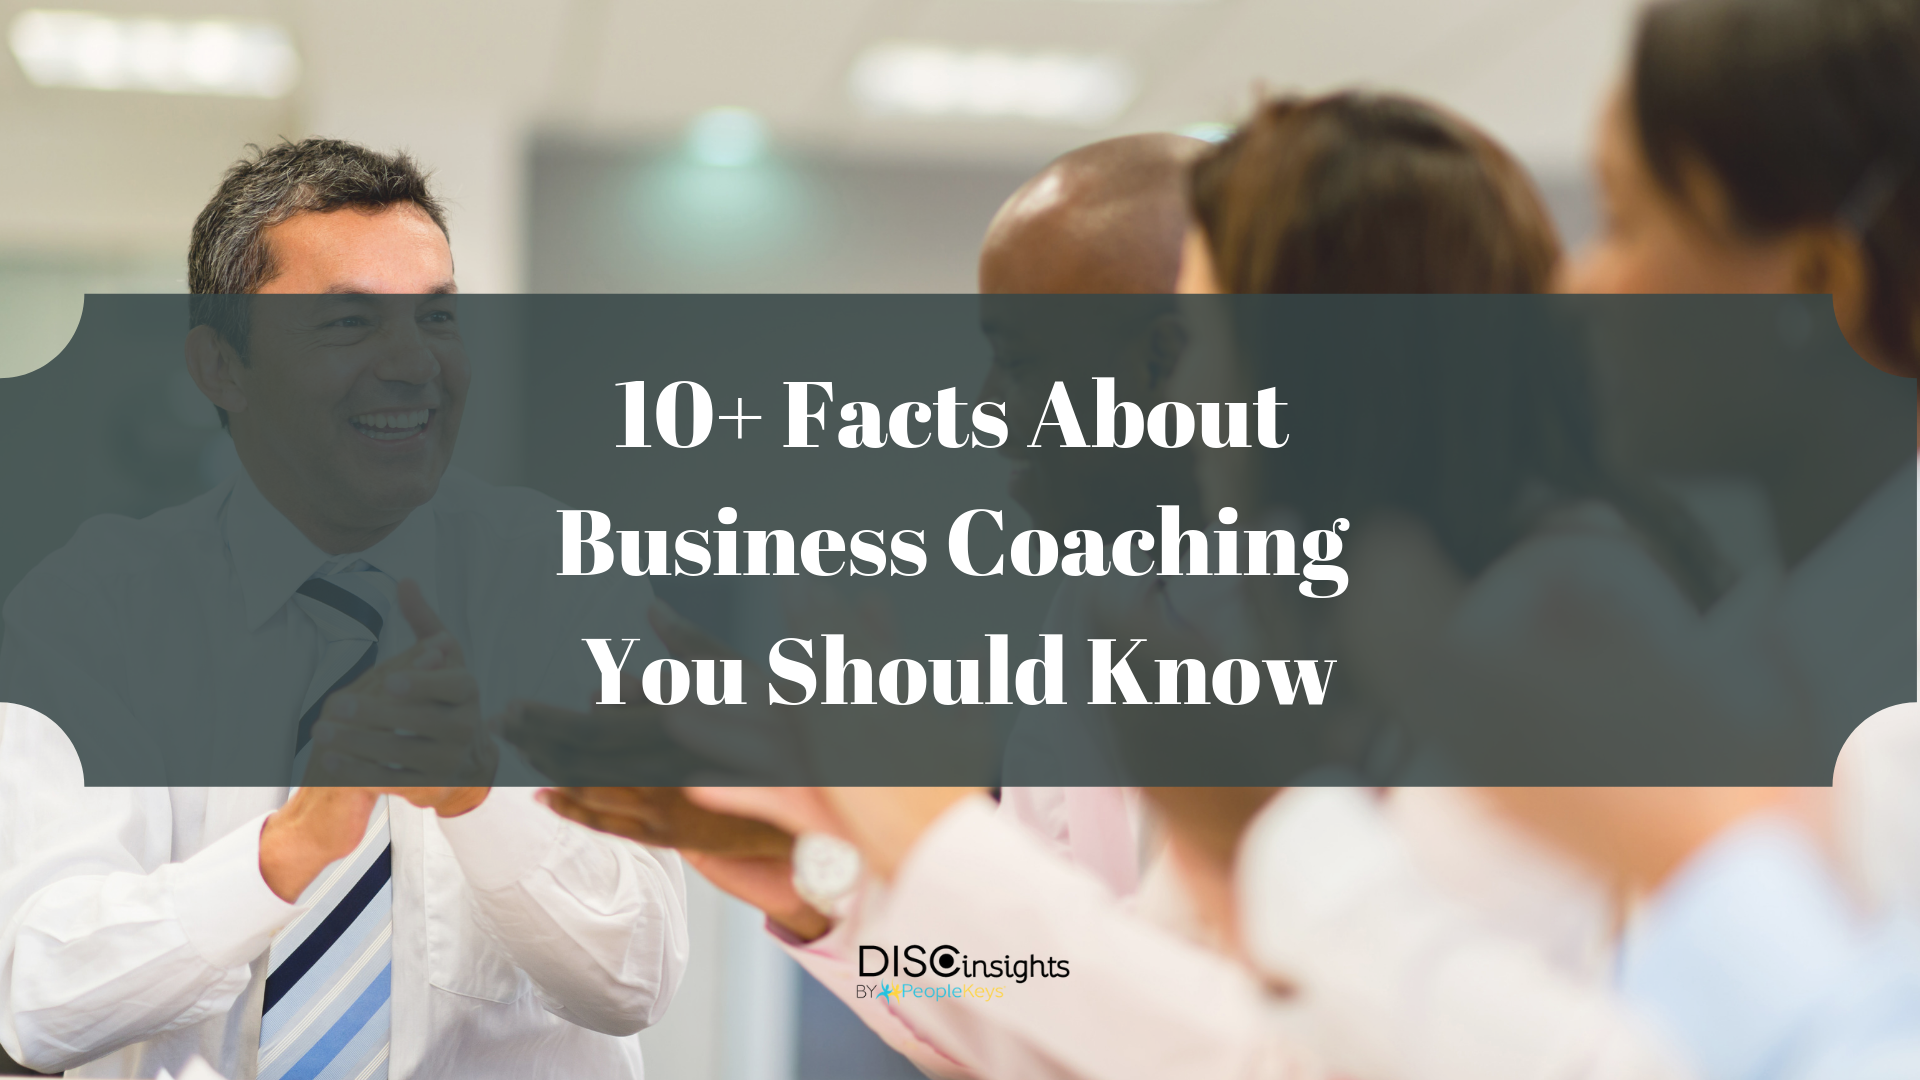 10+ Facts About Business Coaching You Should Know